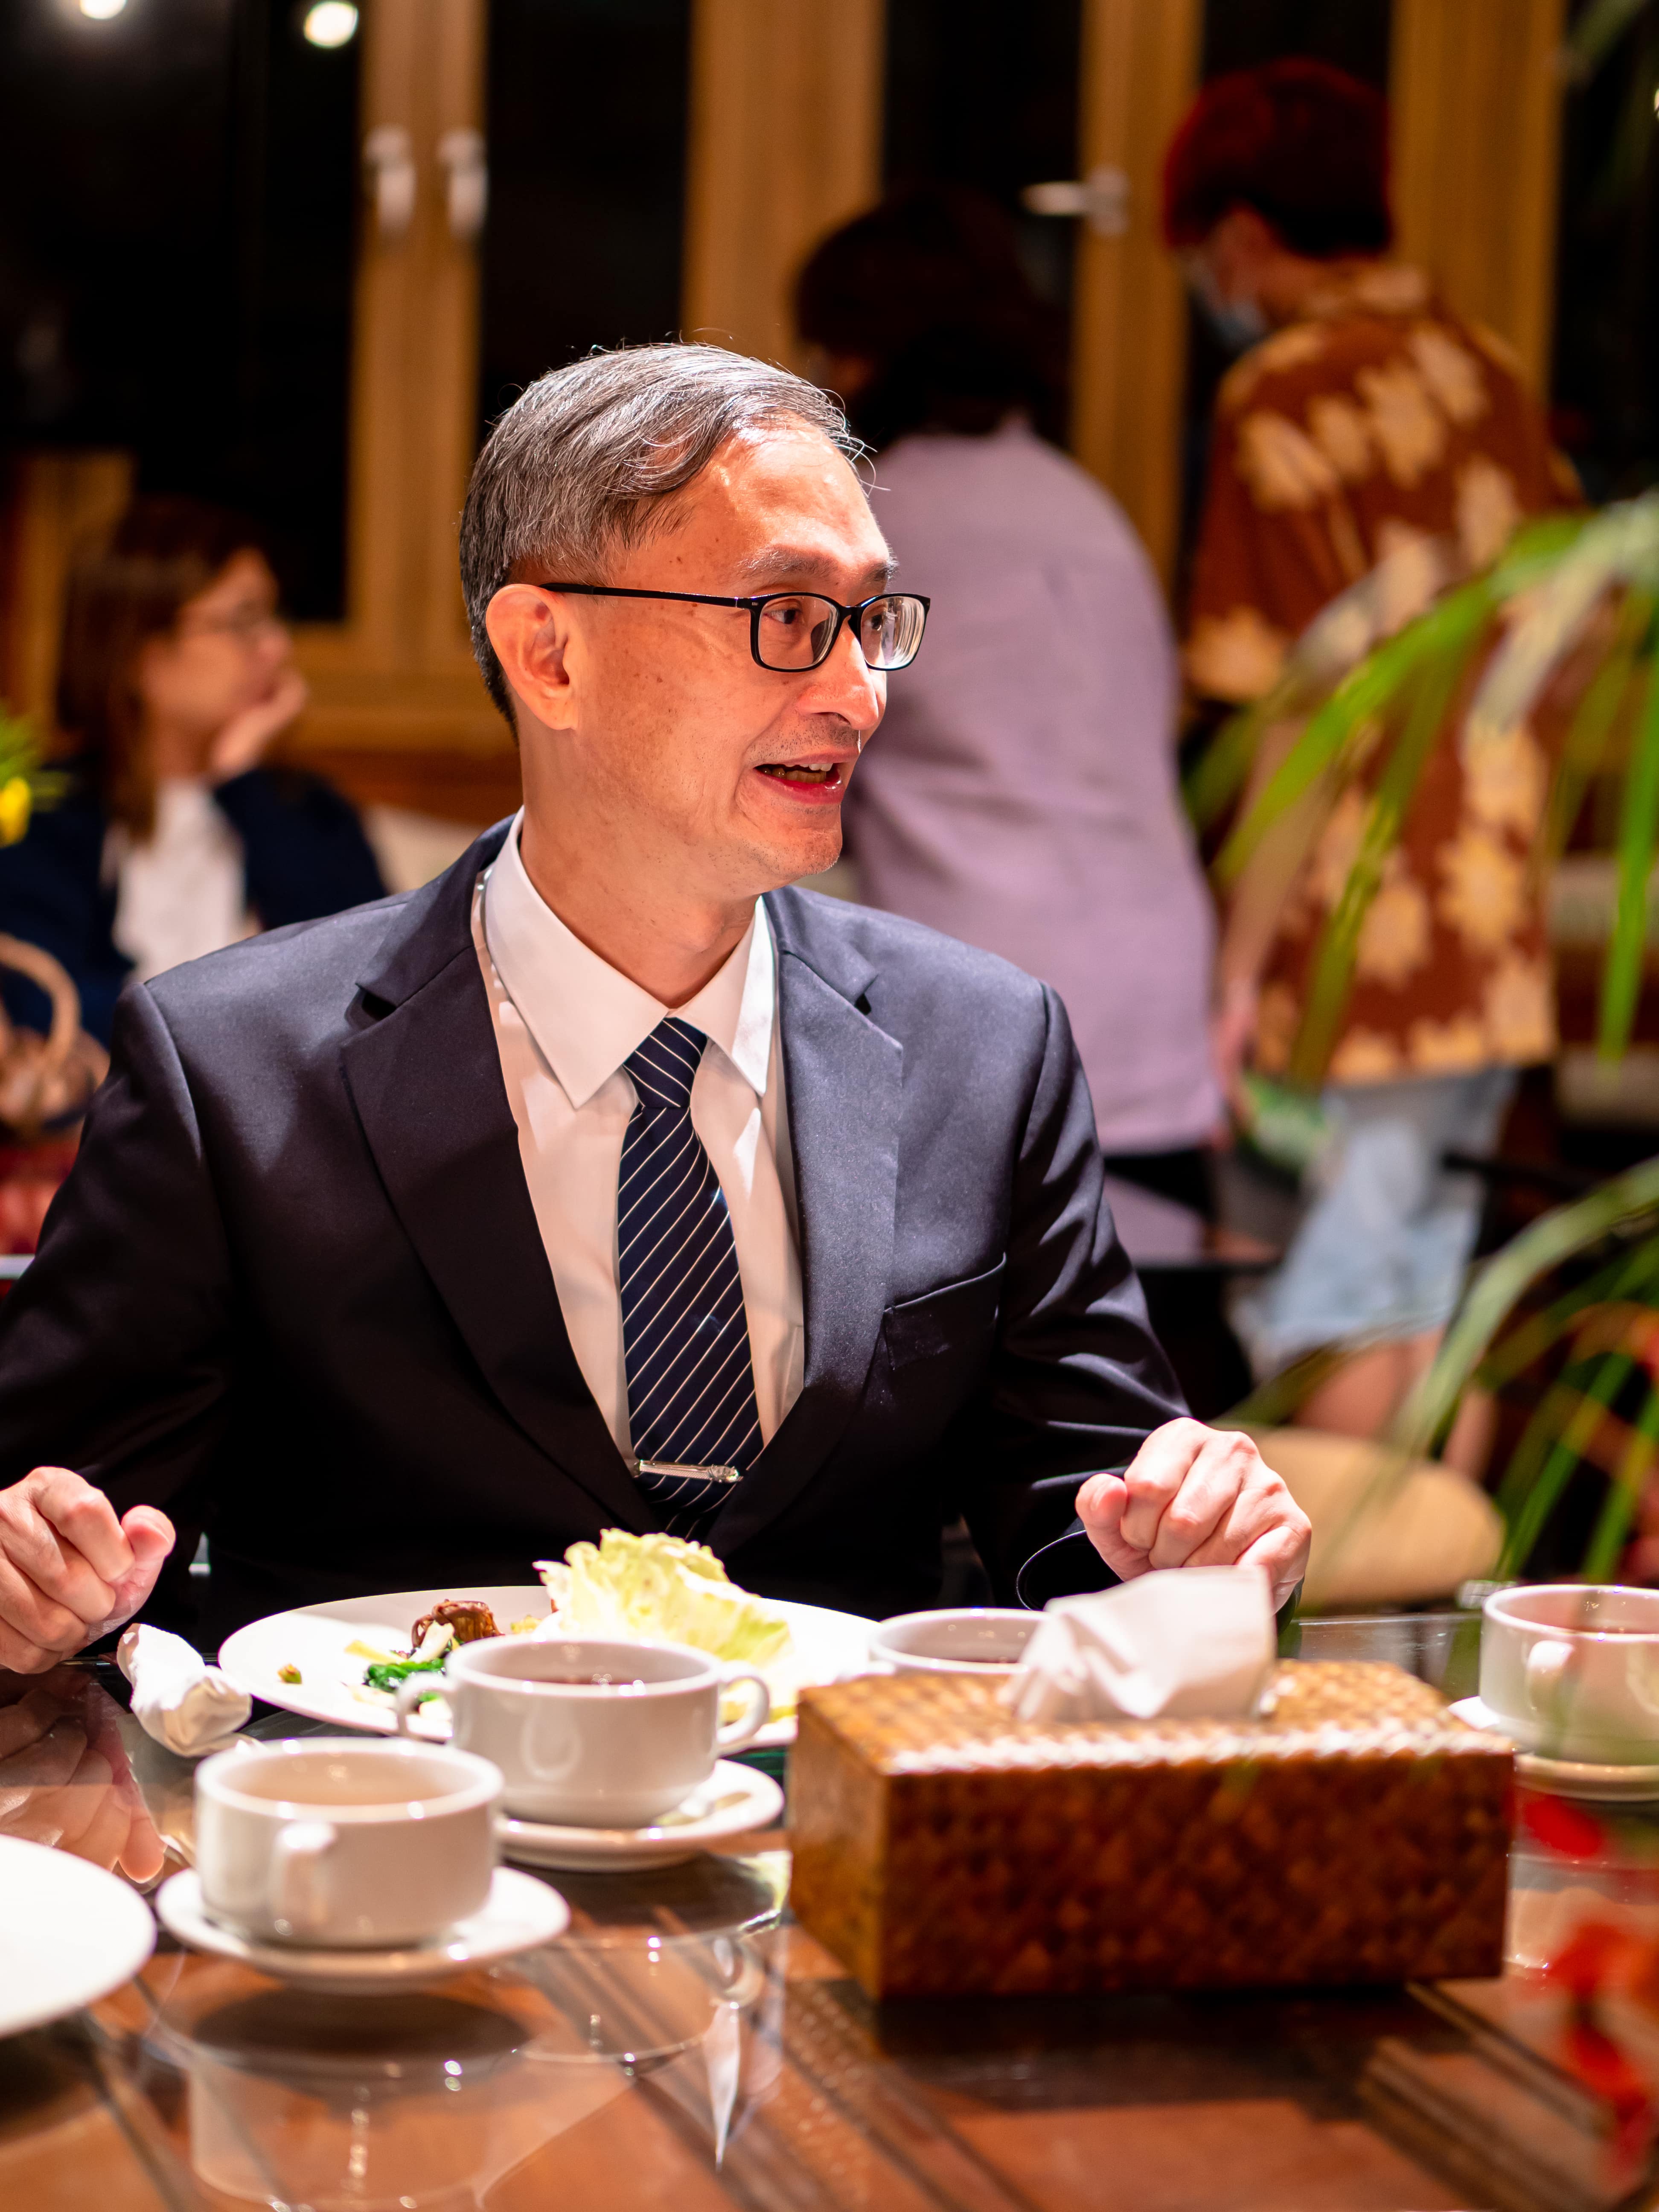 Dr. Li having dinner and talking to some of the guests.【Photo by Daniel Lazar】